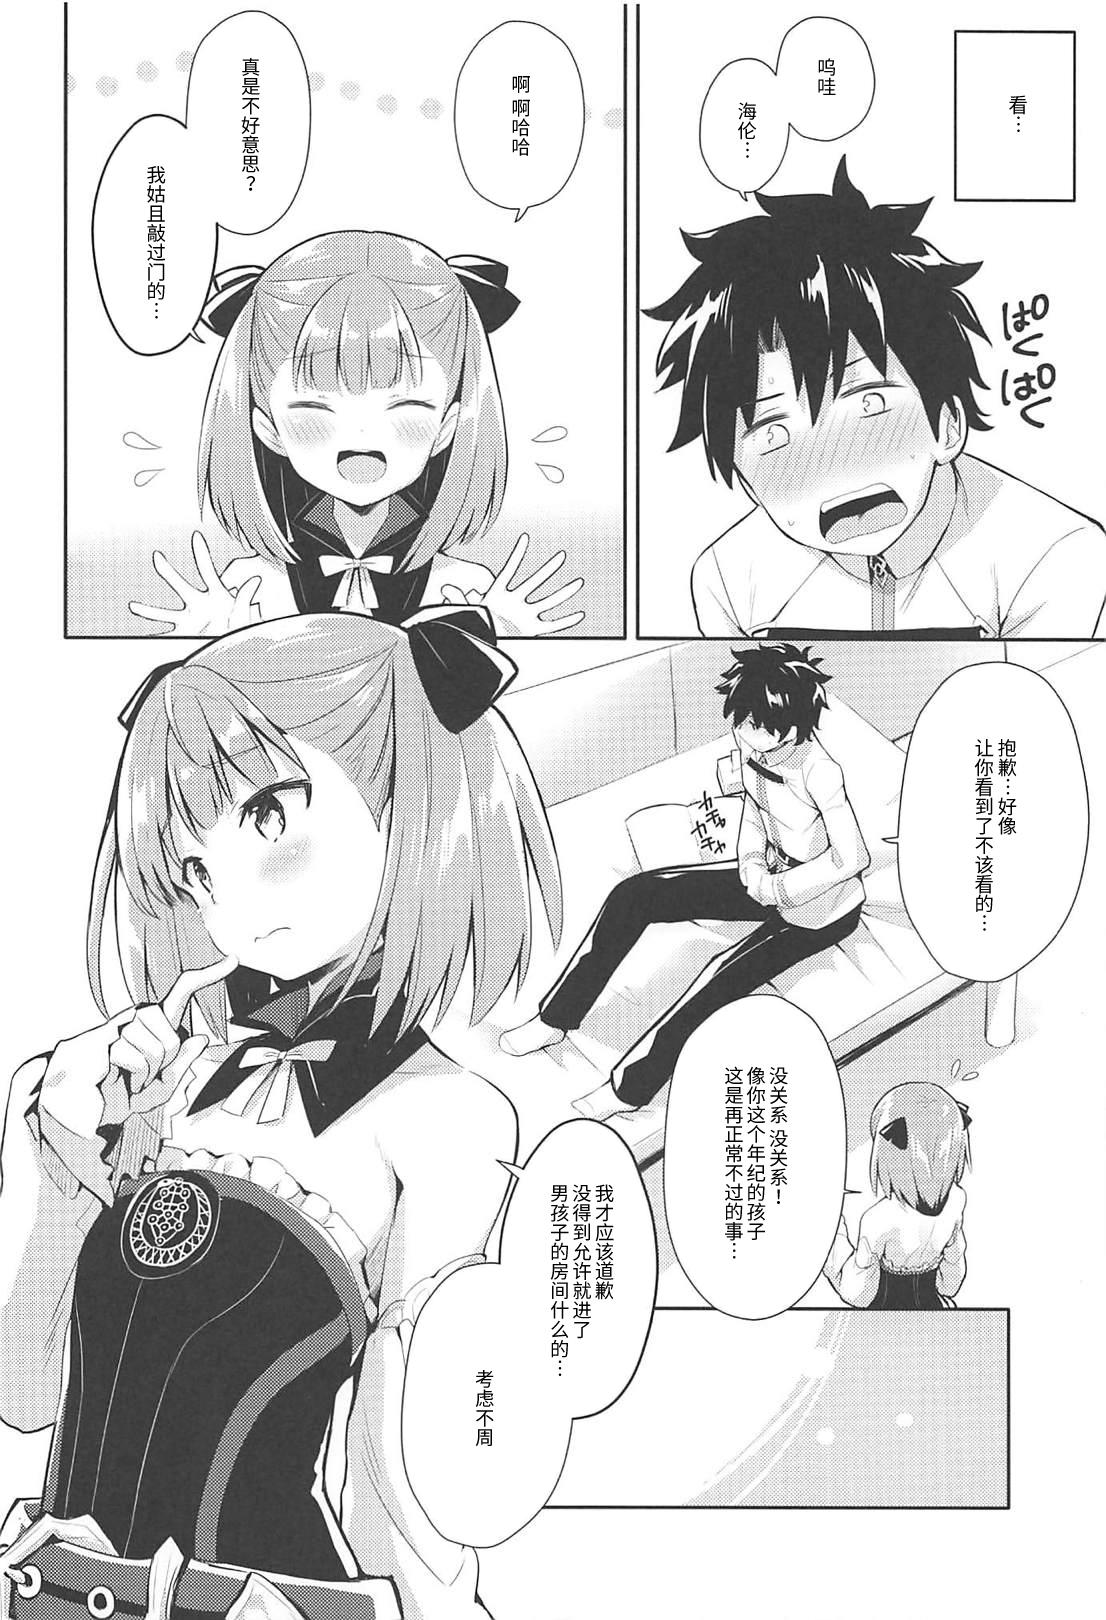 Snatch Amaechattemo Yokutteyo! - Fate grand order Magrinha - Page 5